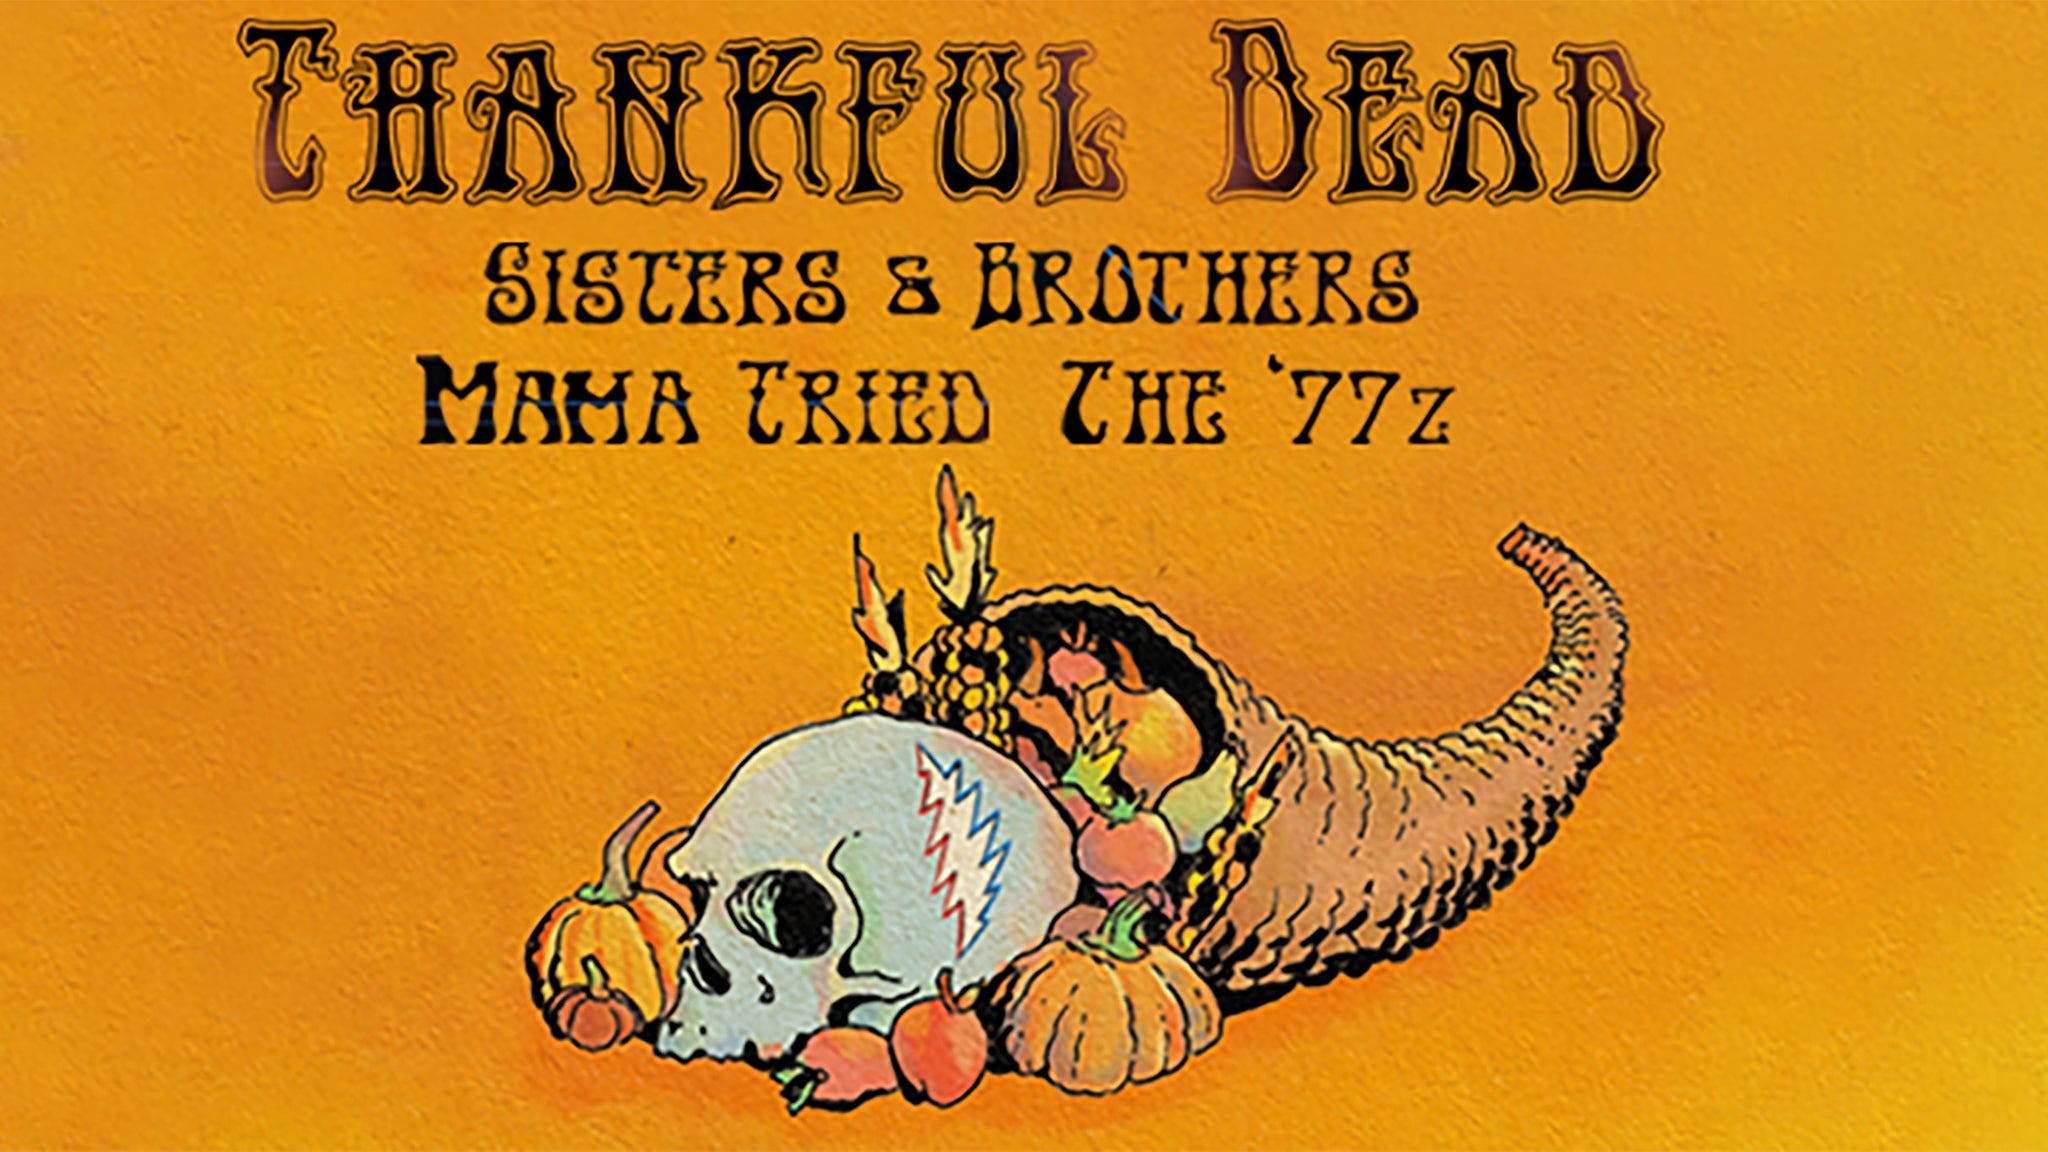 Thankful Dead with Sisters & Brothers, The 77z & Mama Tried